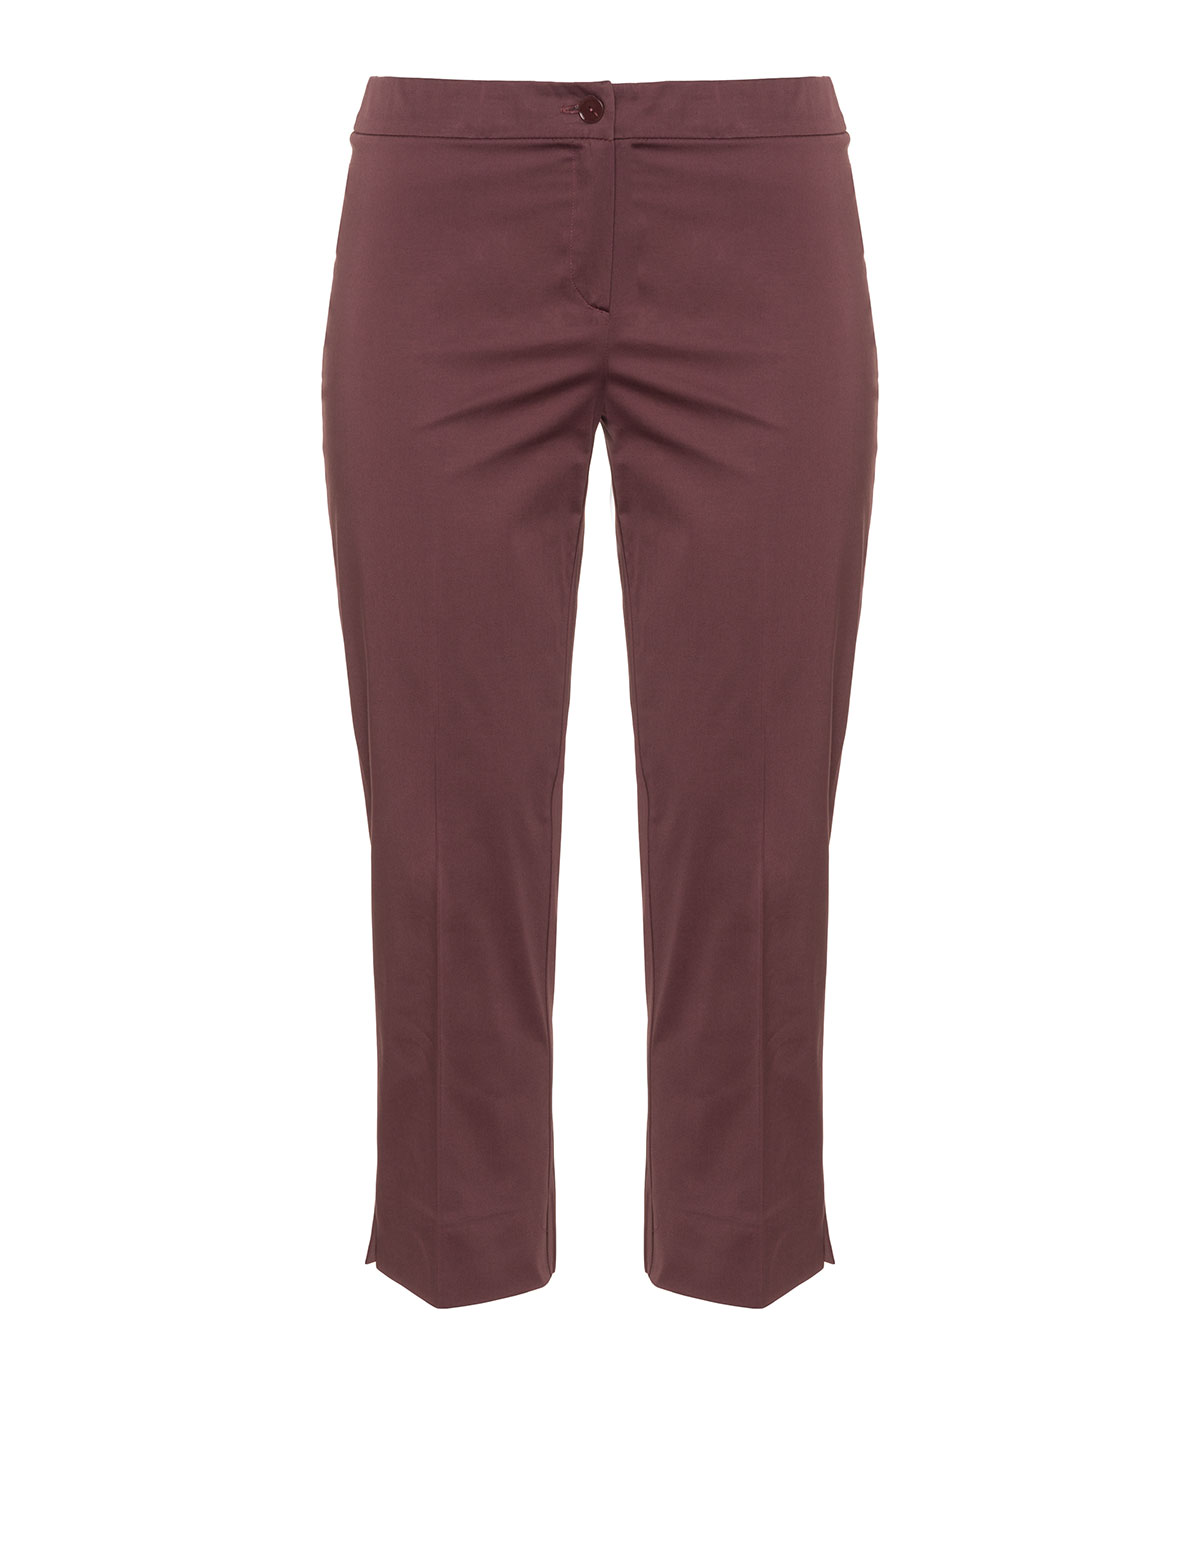 Cropped trousers by
Persona